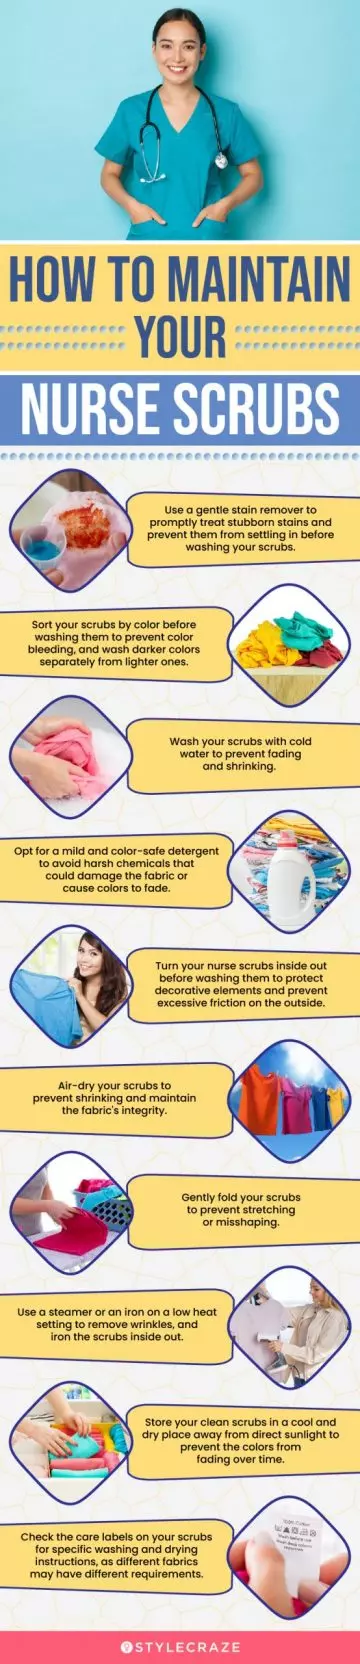 Tips To Care For Your Nurse Scrubs (infographic)